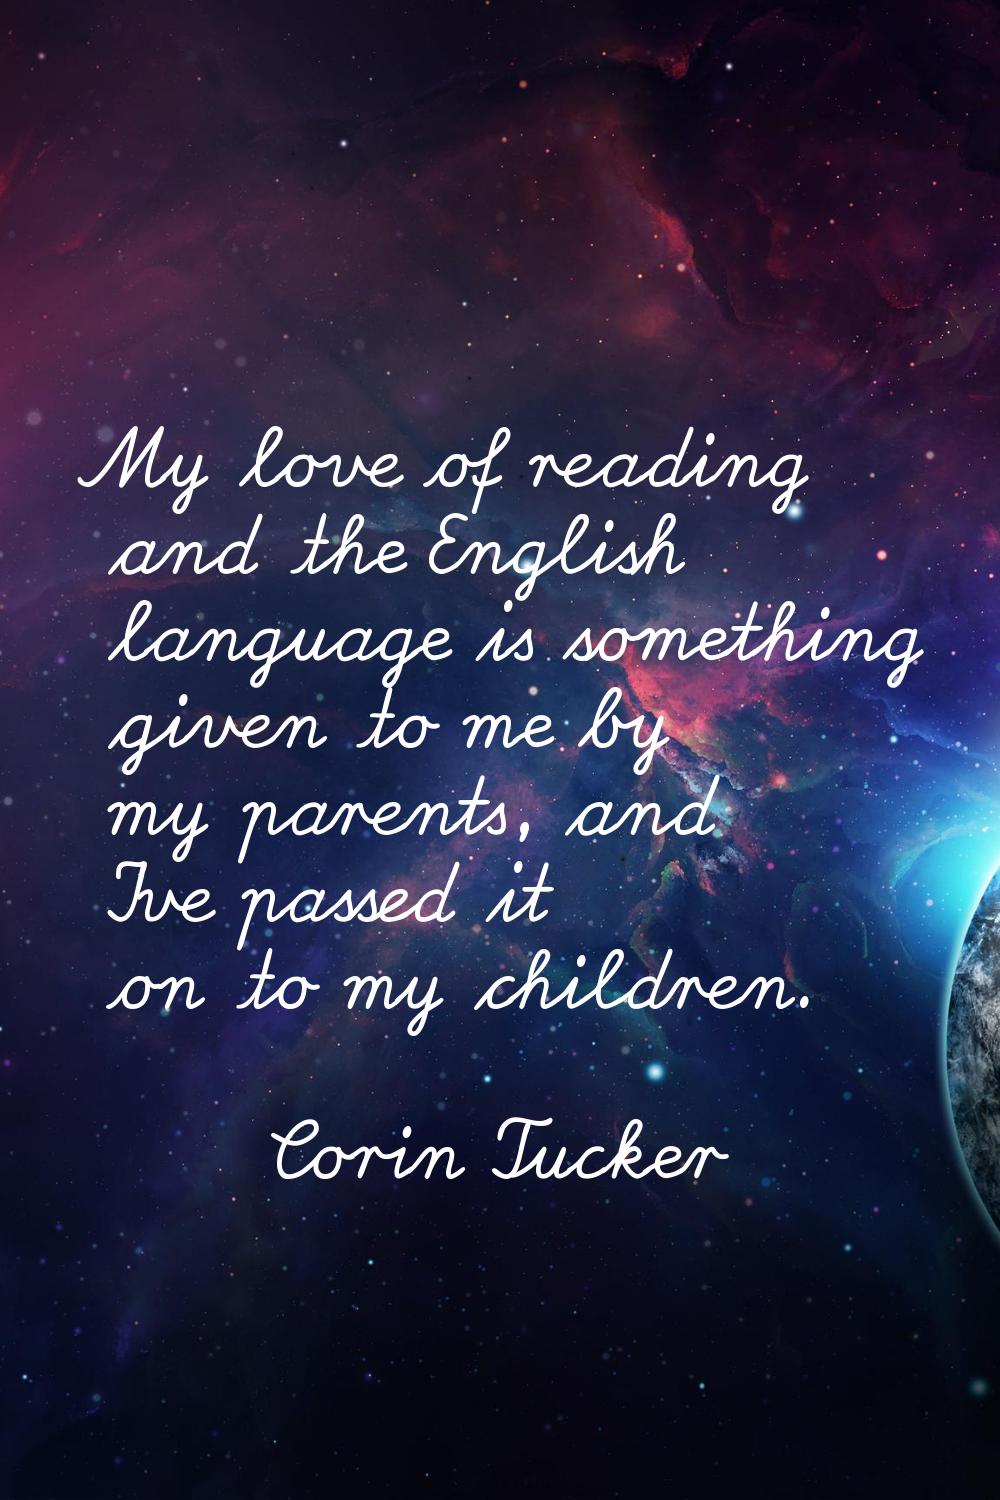 My love of reading and the English language is something given to me by my parents, and I've passed